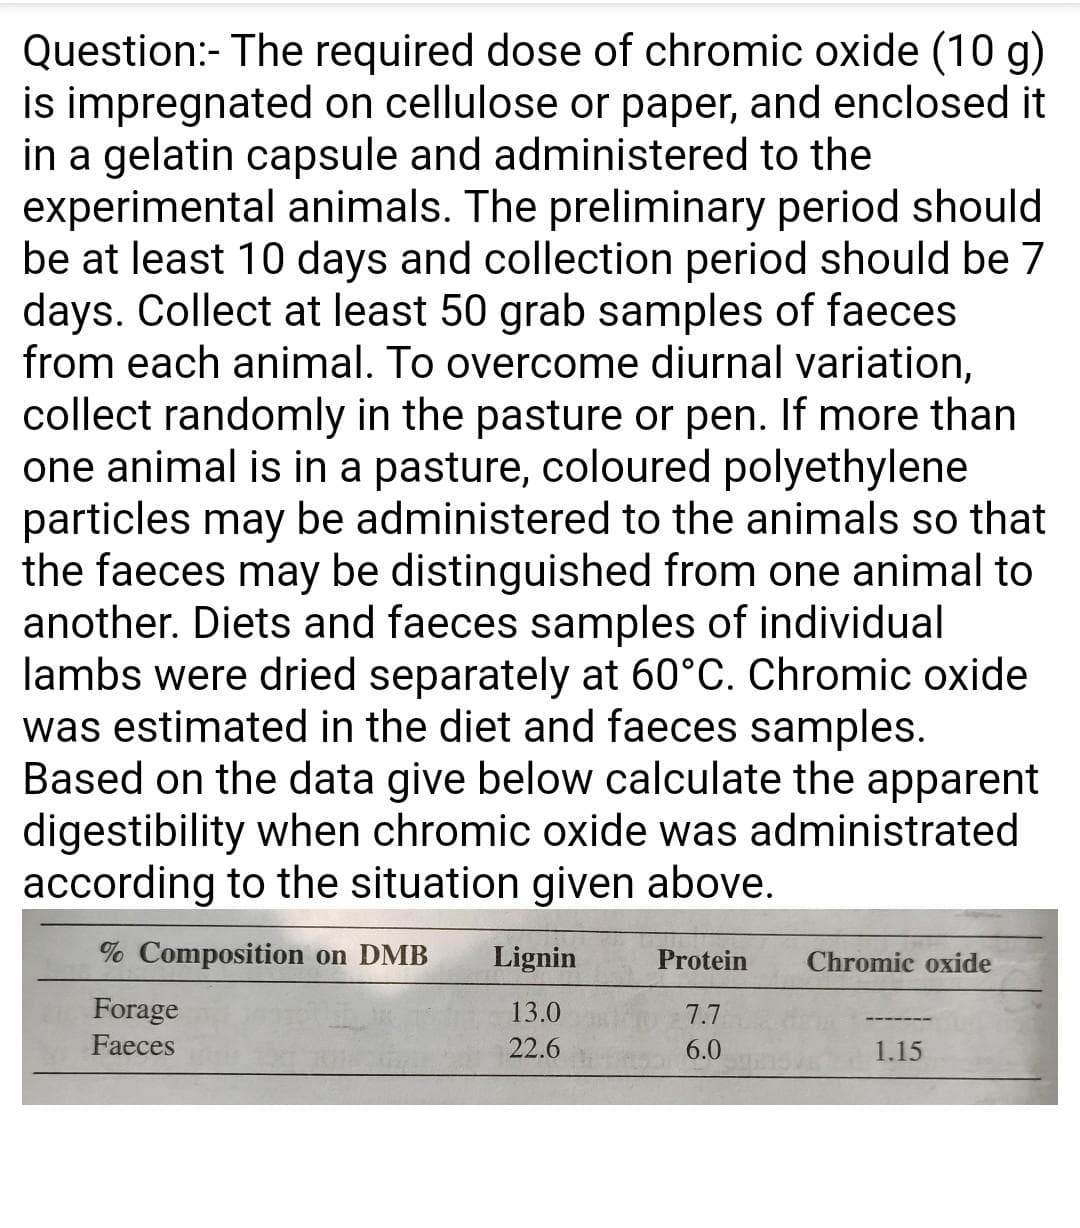 Question:- The required dose of chromic oxide (10 g)
is impregnated on cellulose or paper, and enclosed it
in a gelatin capsule and administered to the
experimental animals. The preliminary period should
be at least 10 days and collection period should be 7
days. Collect at least 50 grab samples of faeces
from each animal. To overcome diurnal variation,
collect randomly in the pasture or pen. If more than
one animal is in a pasture, coloured polyethylene
particles may be administered to the animals so that
the faeces may be distinguished from one animal to
another. Diets and faeces samples of individual
lambs were dried separately at 60°C. Chromic oxide
was estimated in the diet and faeces samples.
Based on the data give below calculate the apparent
digestibility when chromic oxide was administrated
according to the situation given above.
% Composition on DMB
Lignin
Protein
Chromic oxide
Forage
13.0
7.7
Faeces
22.6
6.0
1.15
